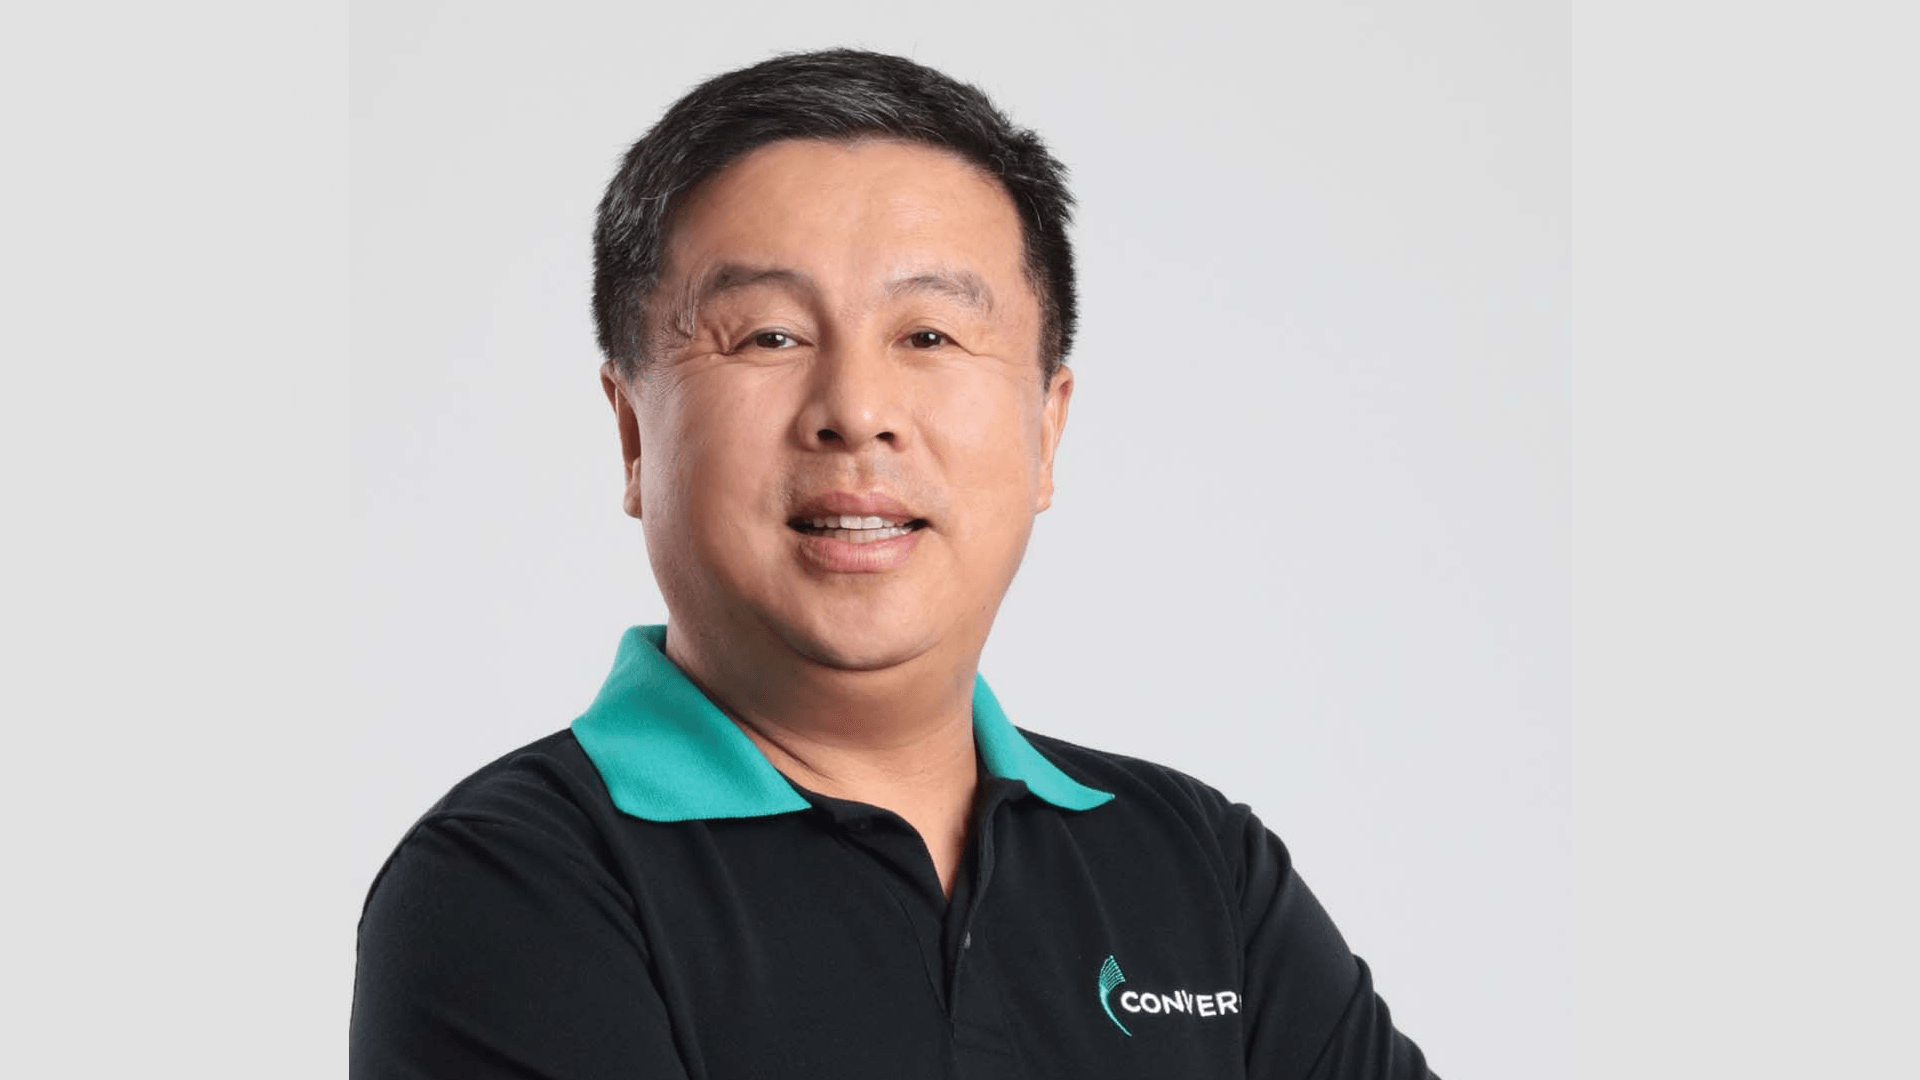 Converge eyes free boost up to 100 Mbps if 2021 subscriber target reached